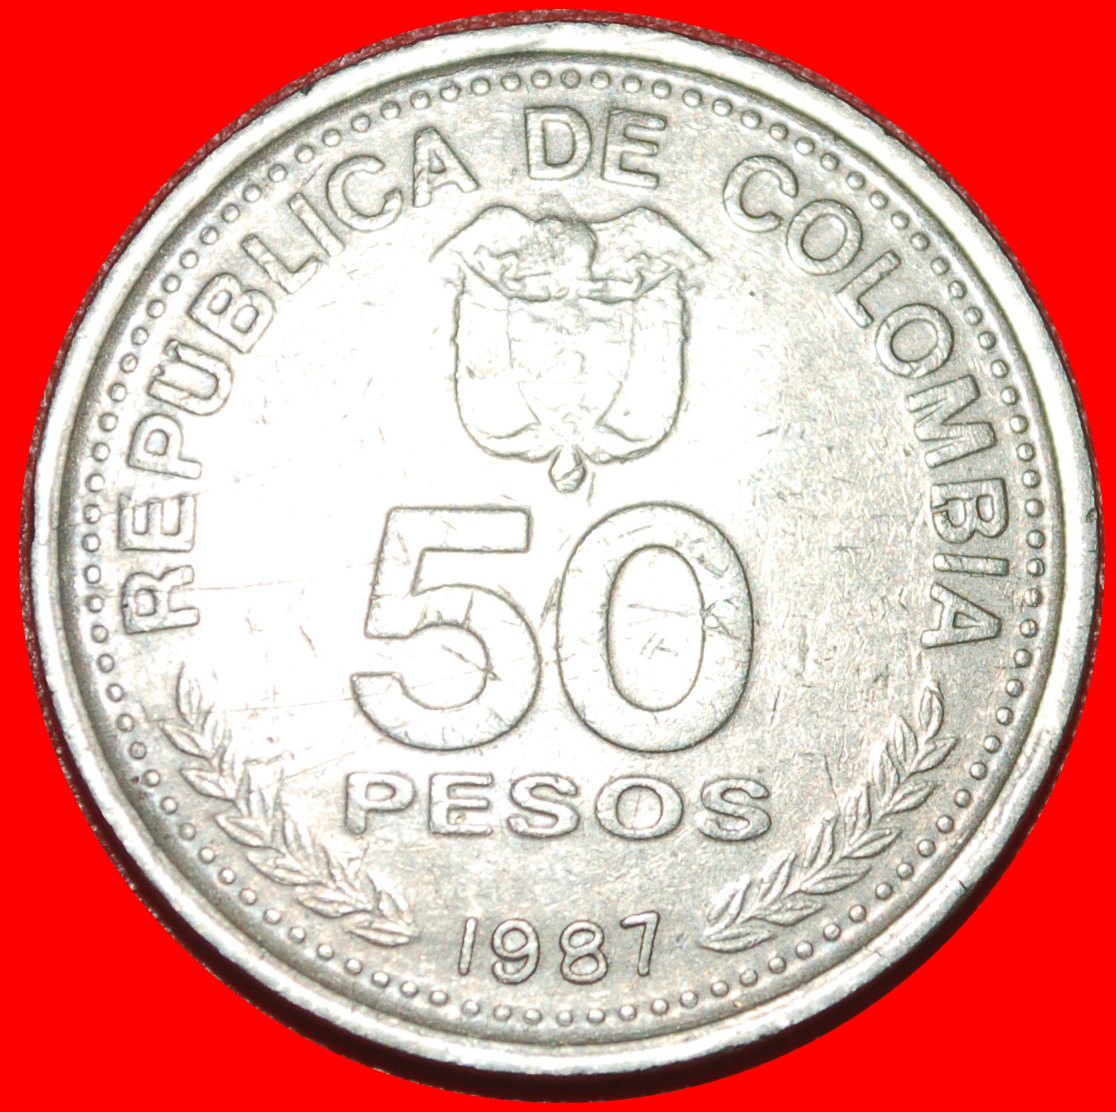  * CONSTITUTION 1886 1936 (1986-1989): COLOMBIA ★ 50 PESOS 1987! LOW START ★ NO RESERVE!   